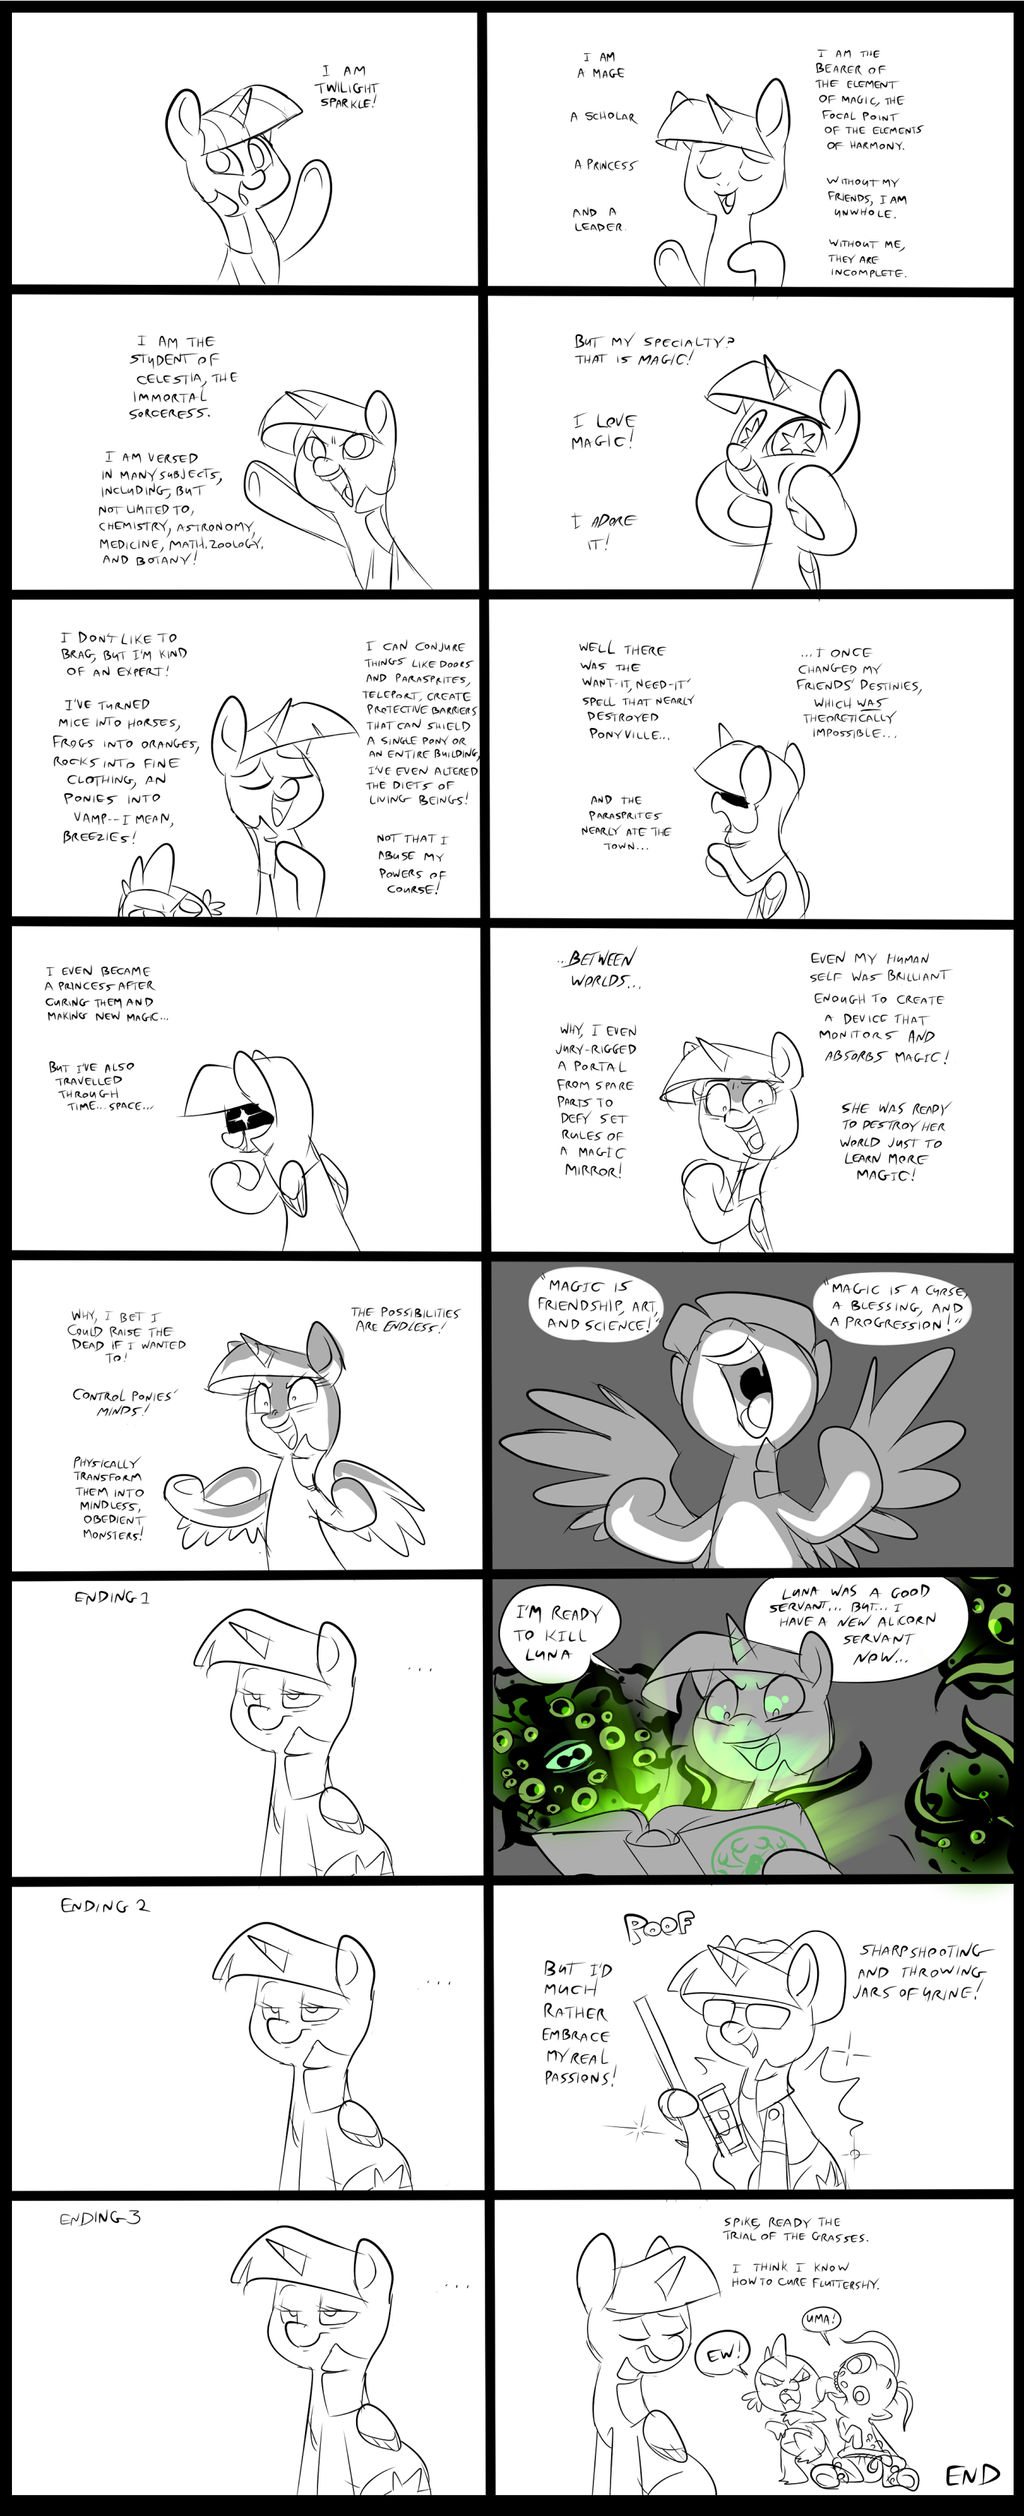 So you think you know Twilight Sparkle...